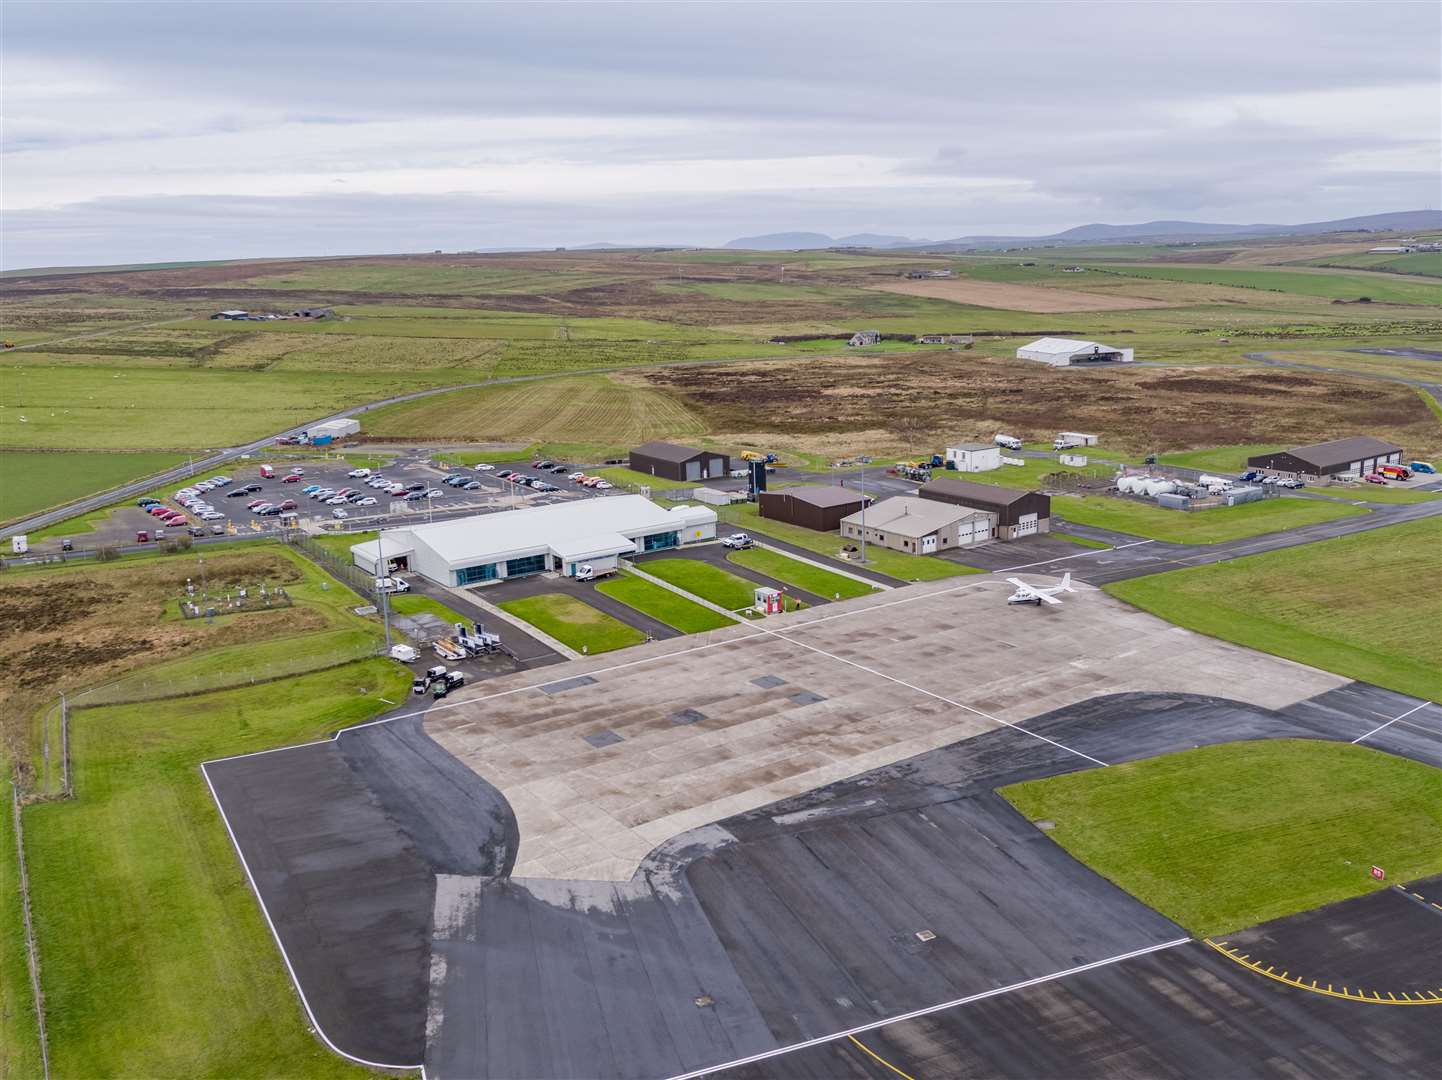 HIAL is already conducting a number of decarbonisation projects at Kirkwall Airport.